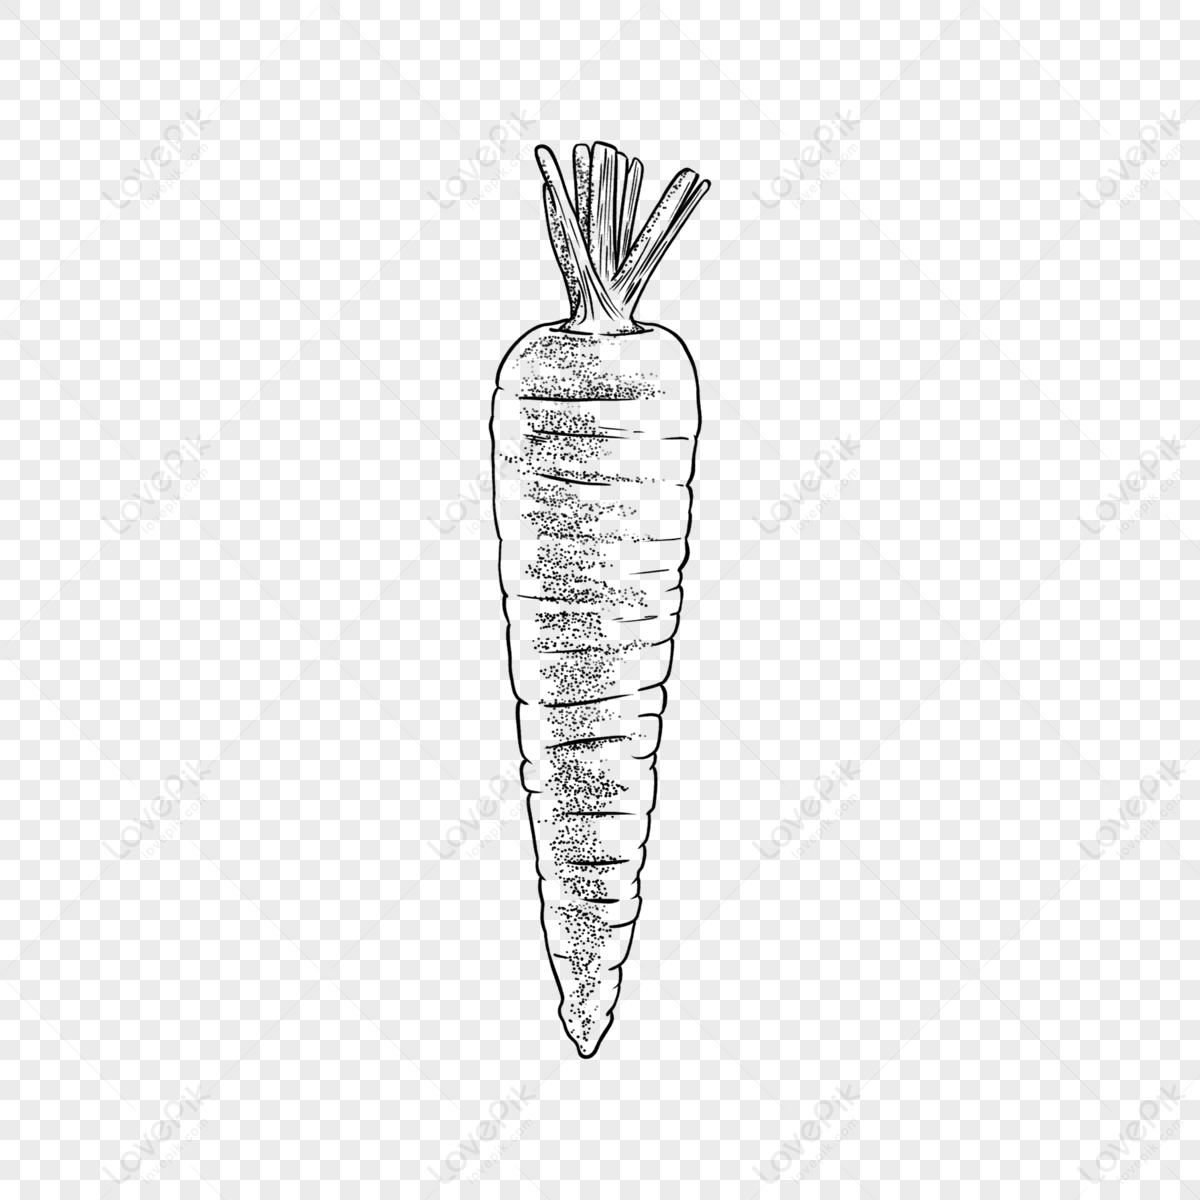 Maddie Hope - Illustrations and Design - carrots illustration - bunch of  carrots coloured pencil | Vegetable illustration, Carrot drawing, Creative  illustration